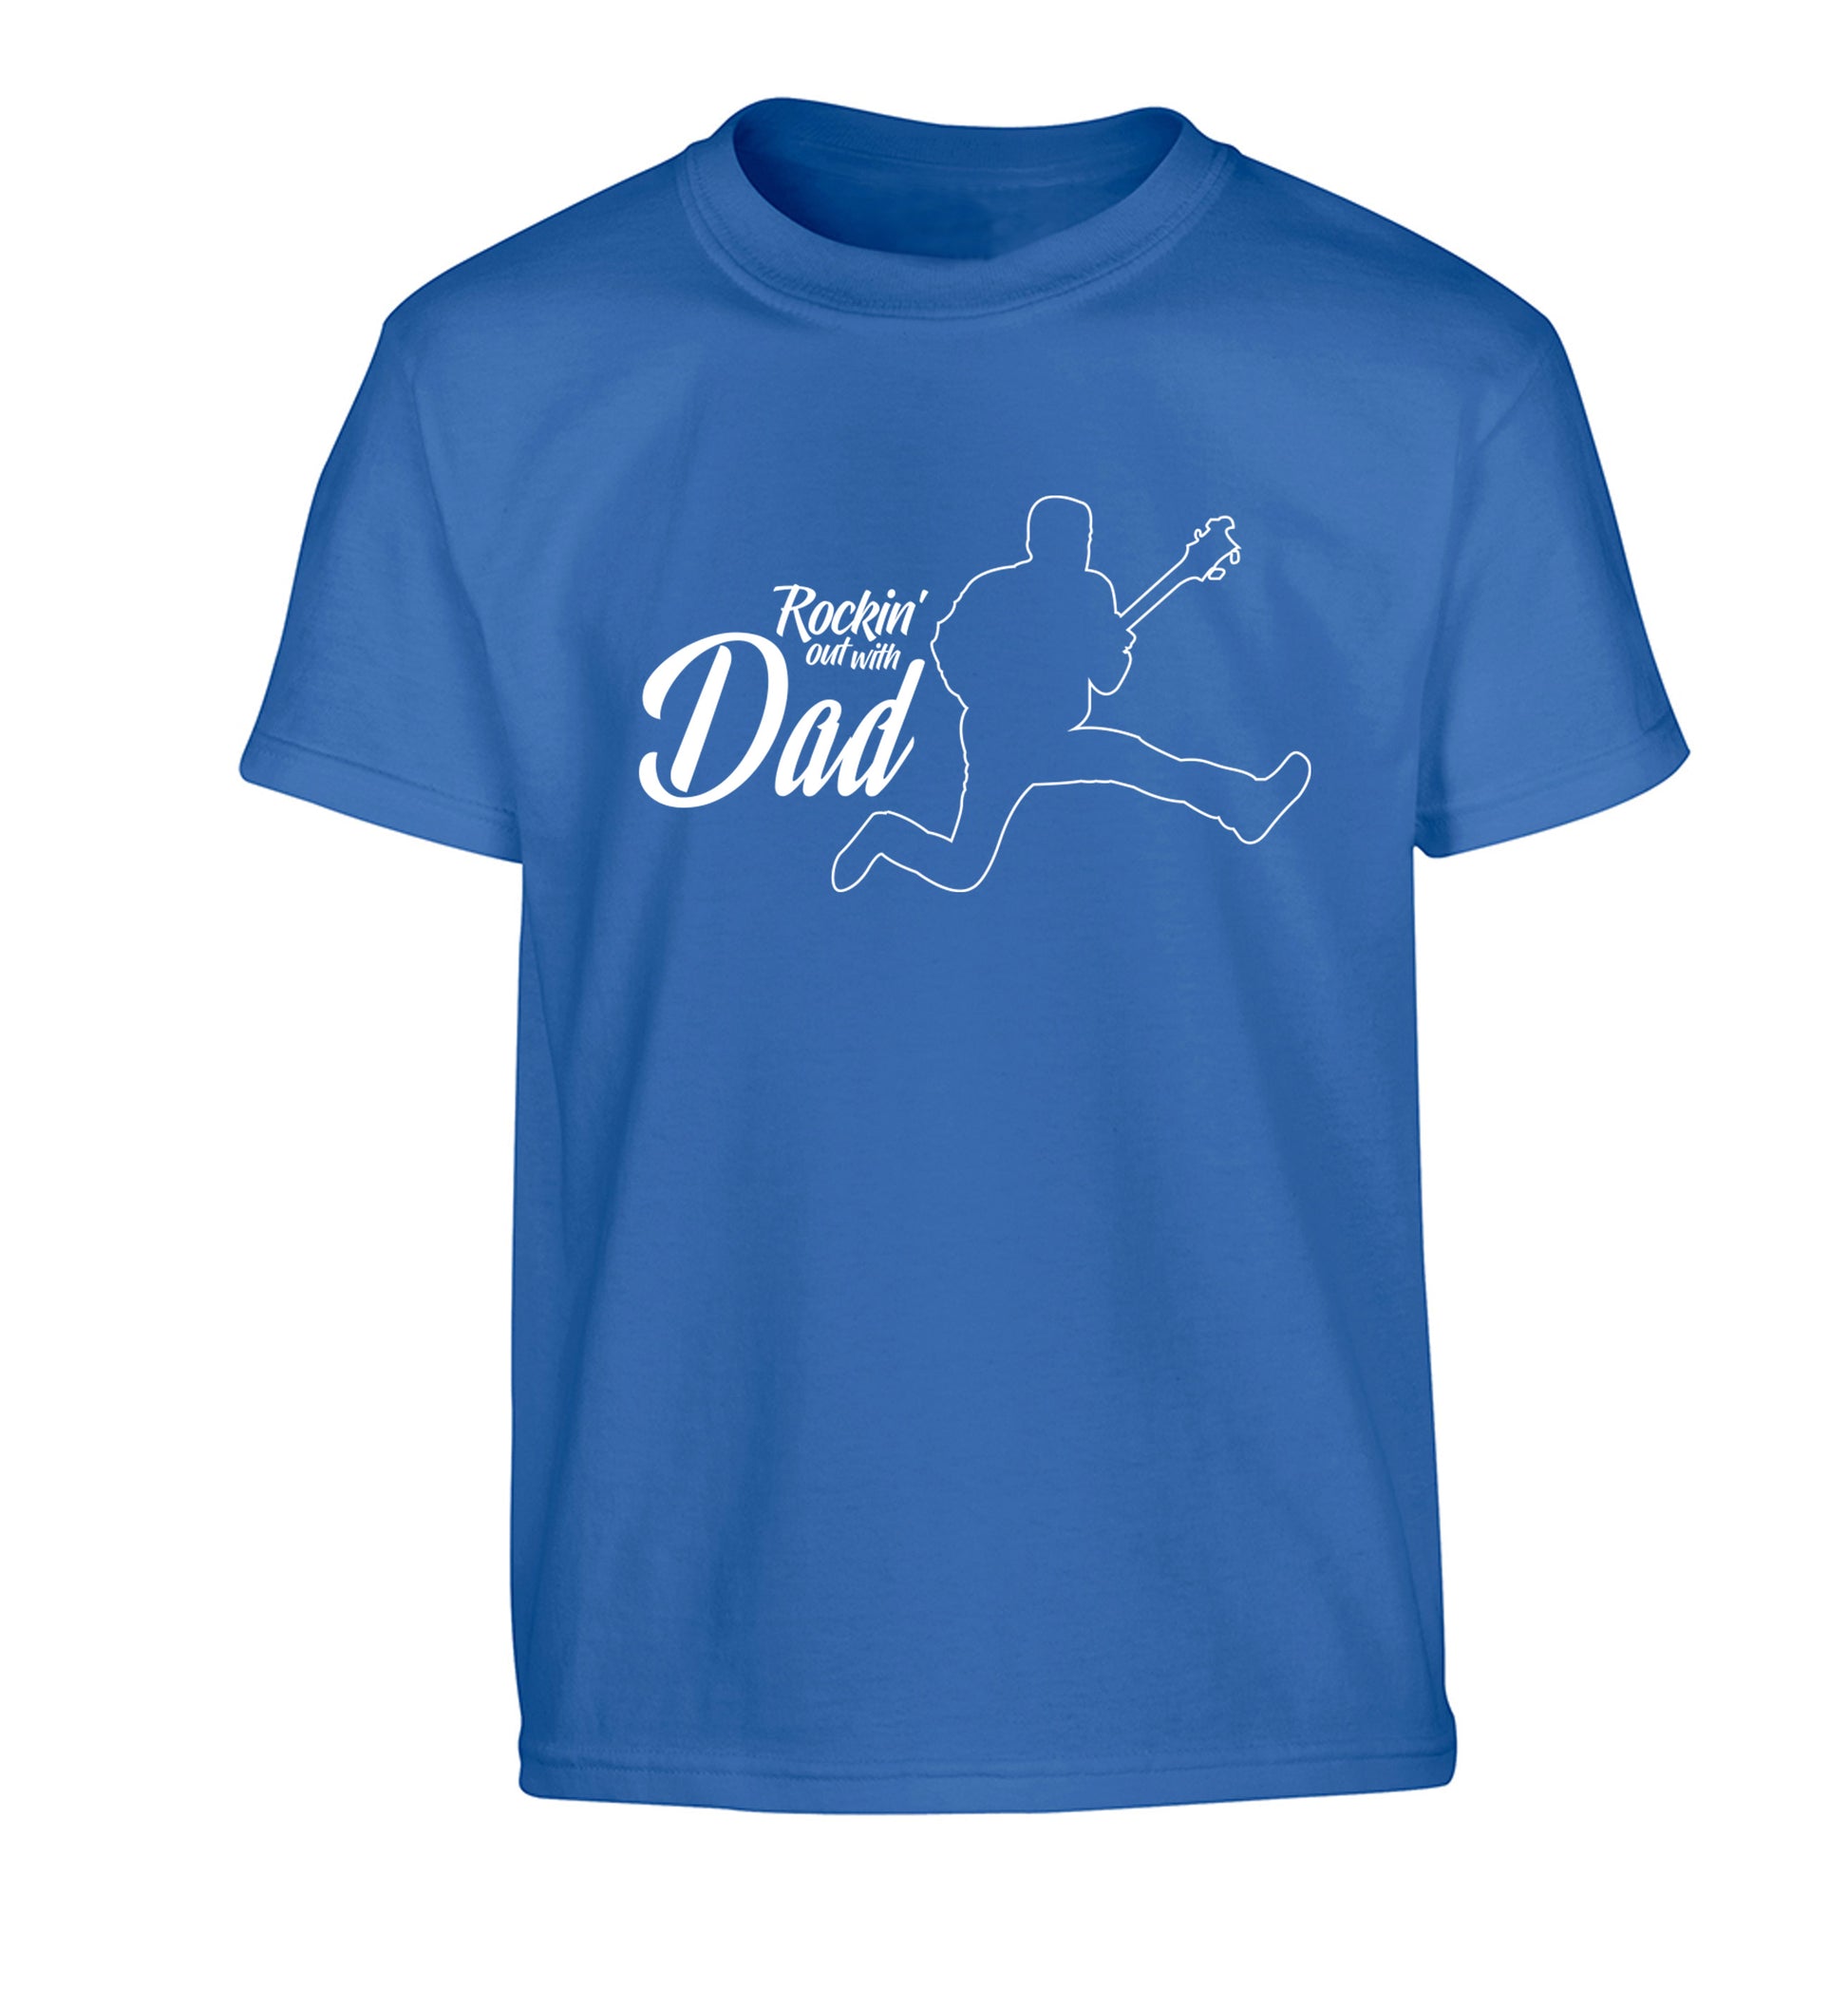 Rockin out with dad Children's blue Tshirt 12-13 Years